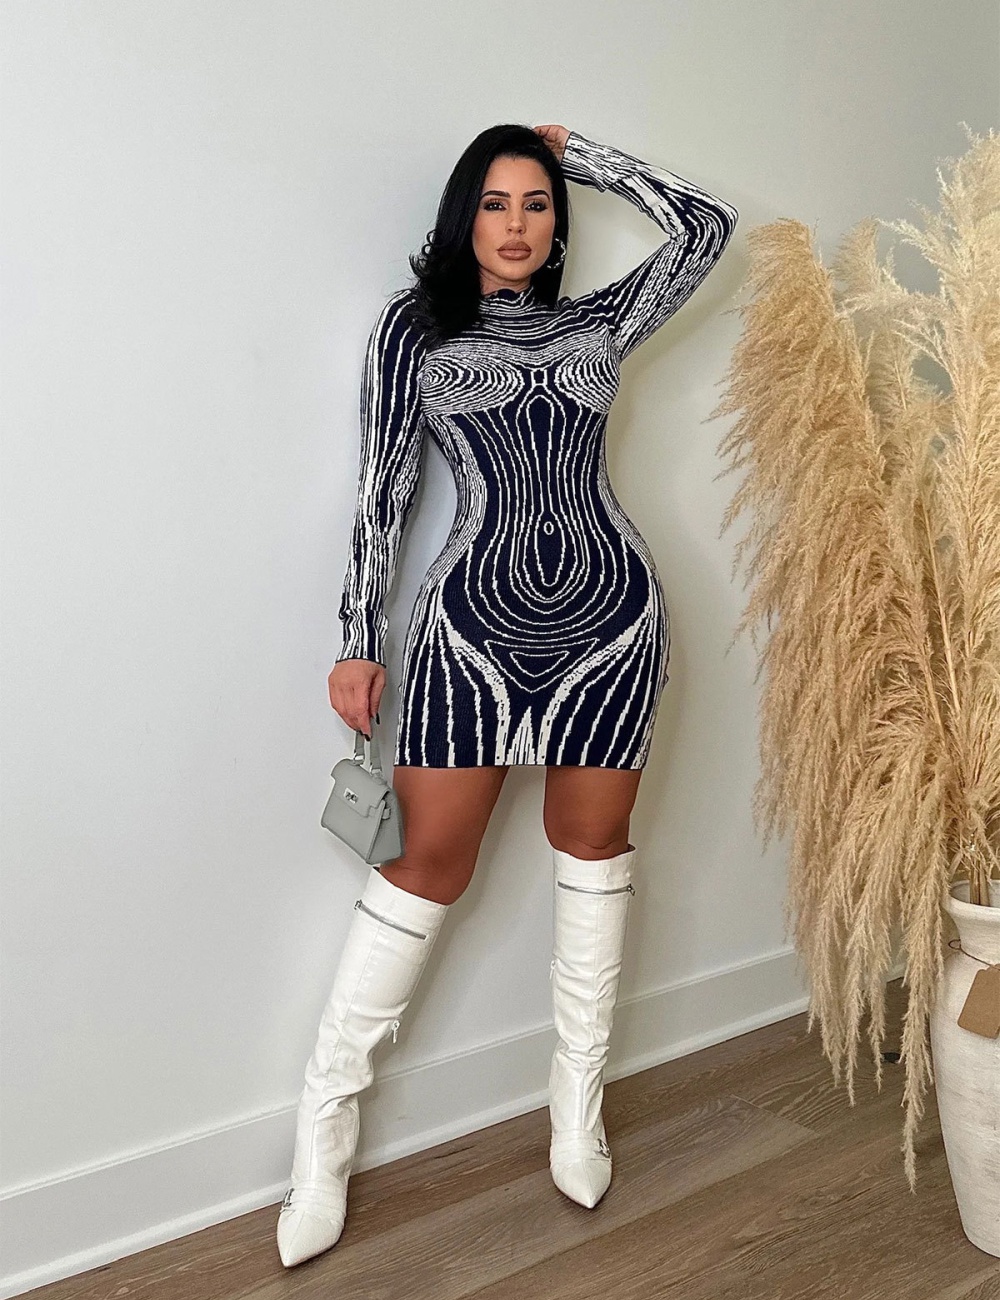 European style sexy dress long sleeve all-match T-back